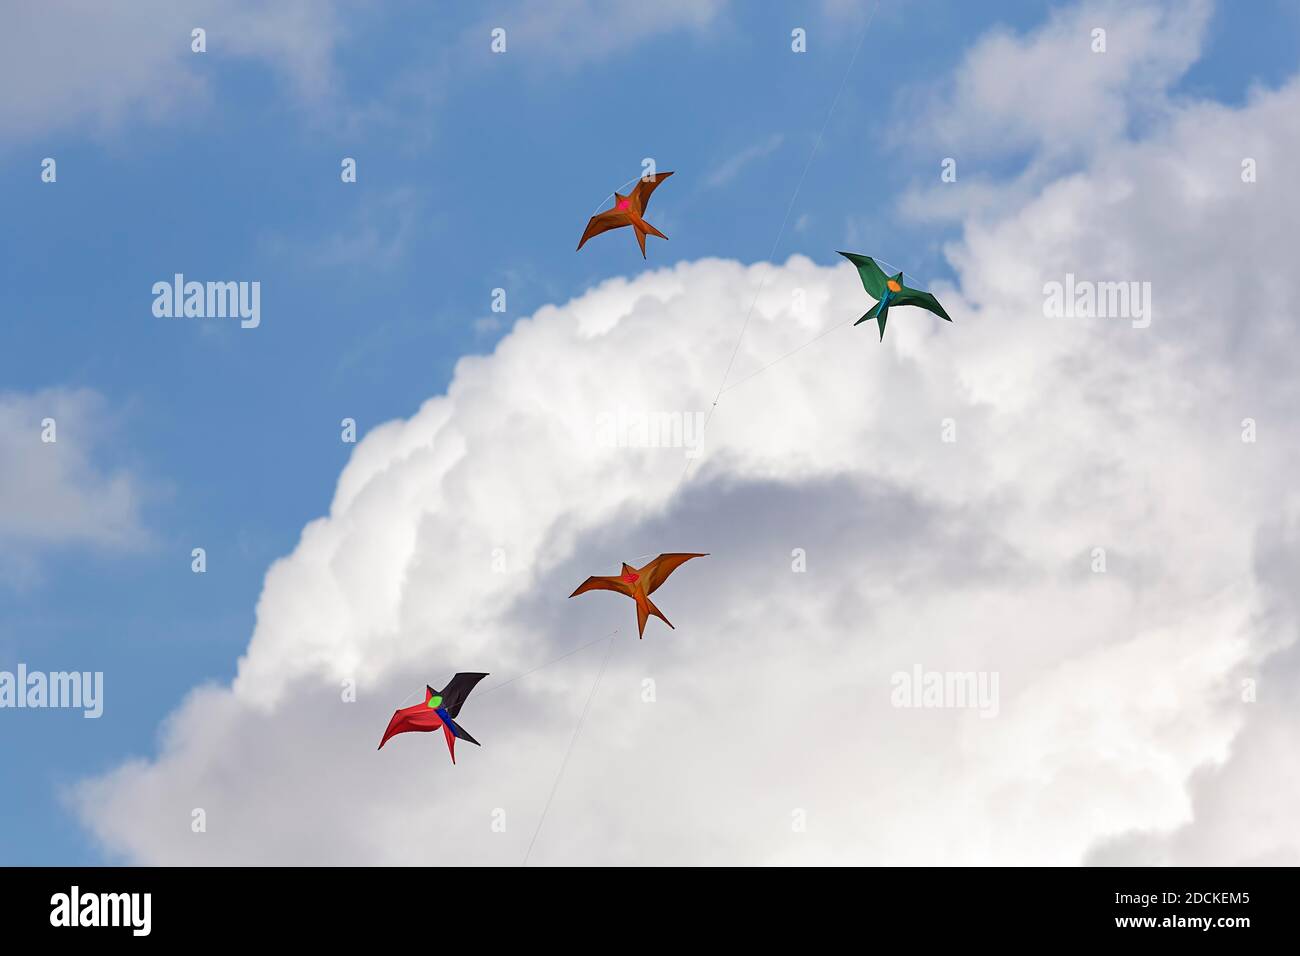 Four colourful kites in bird shape flying in front of cumulus clouds in the blue sky, North Rhine-Westphalia, Germany Stock Photo